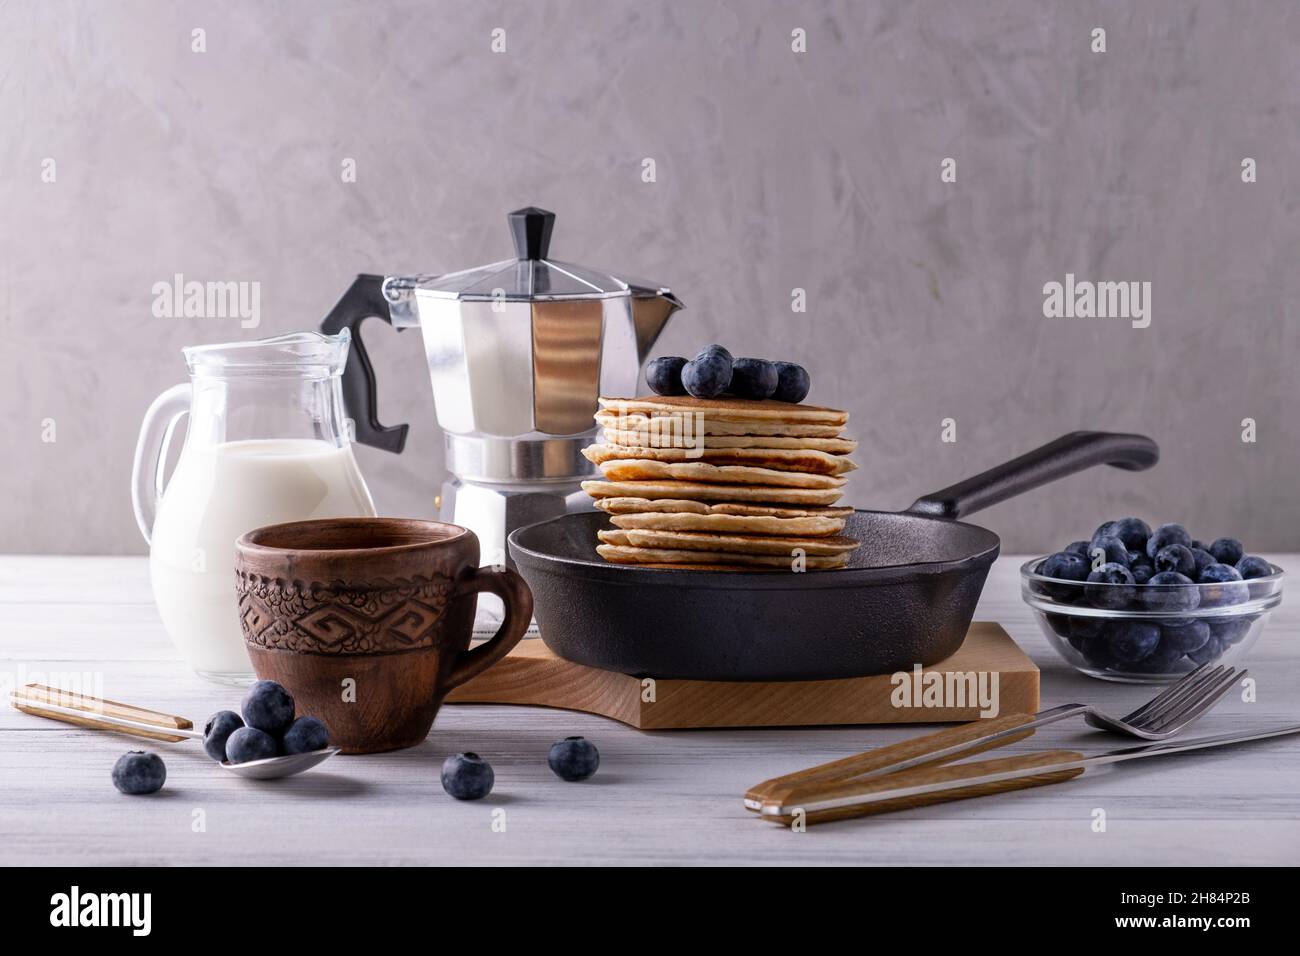 Serve breakfast with pancakes in a small cast iron skillet Stock Photo